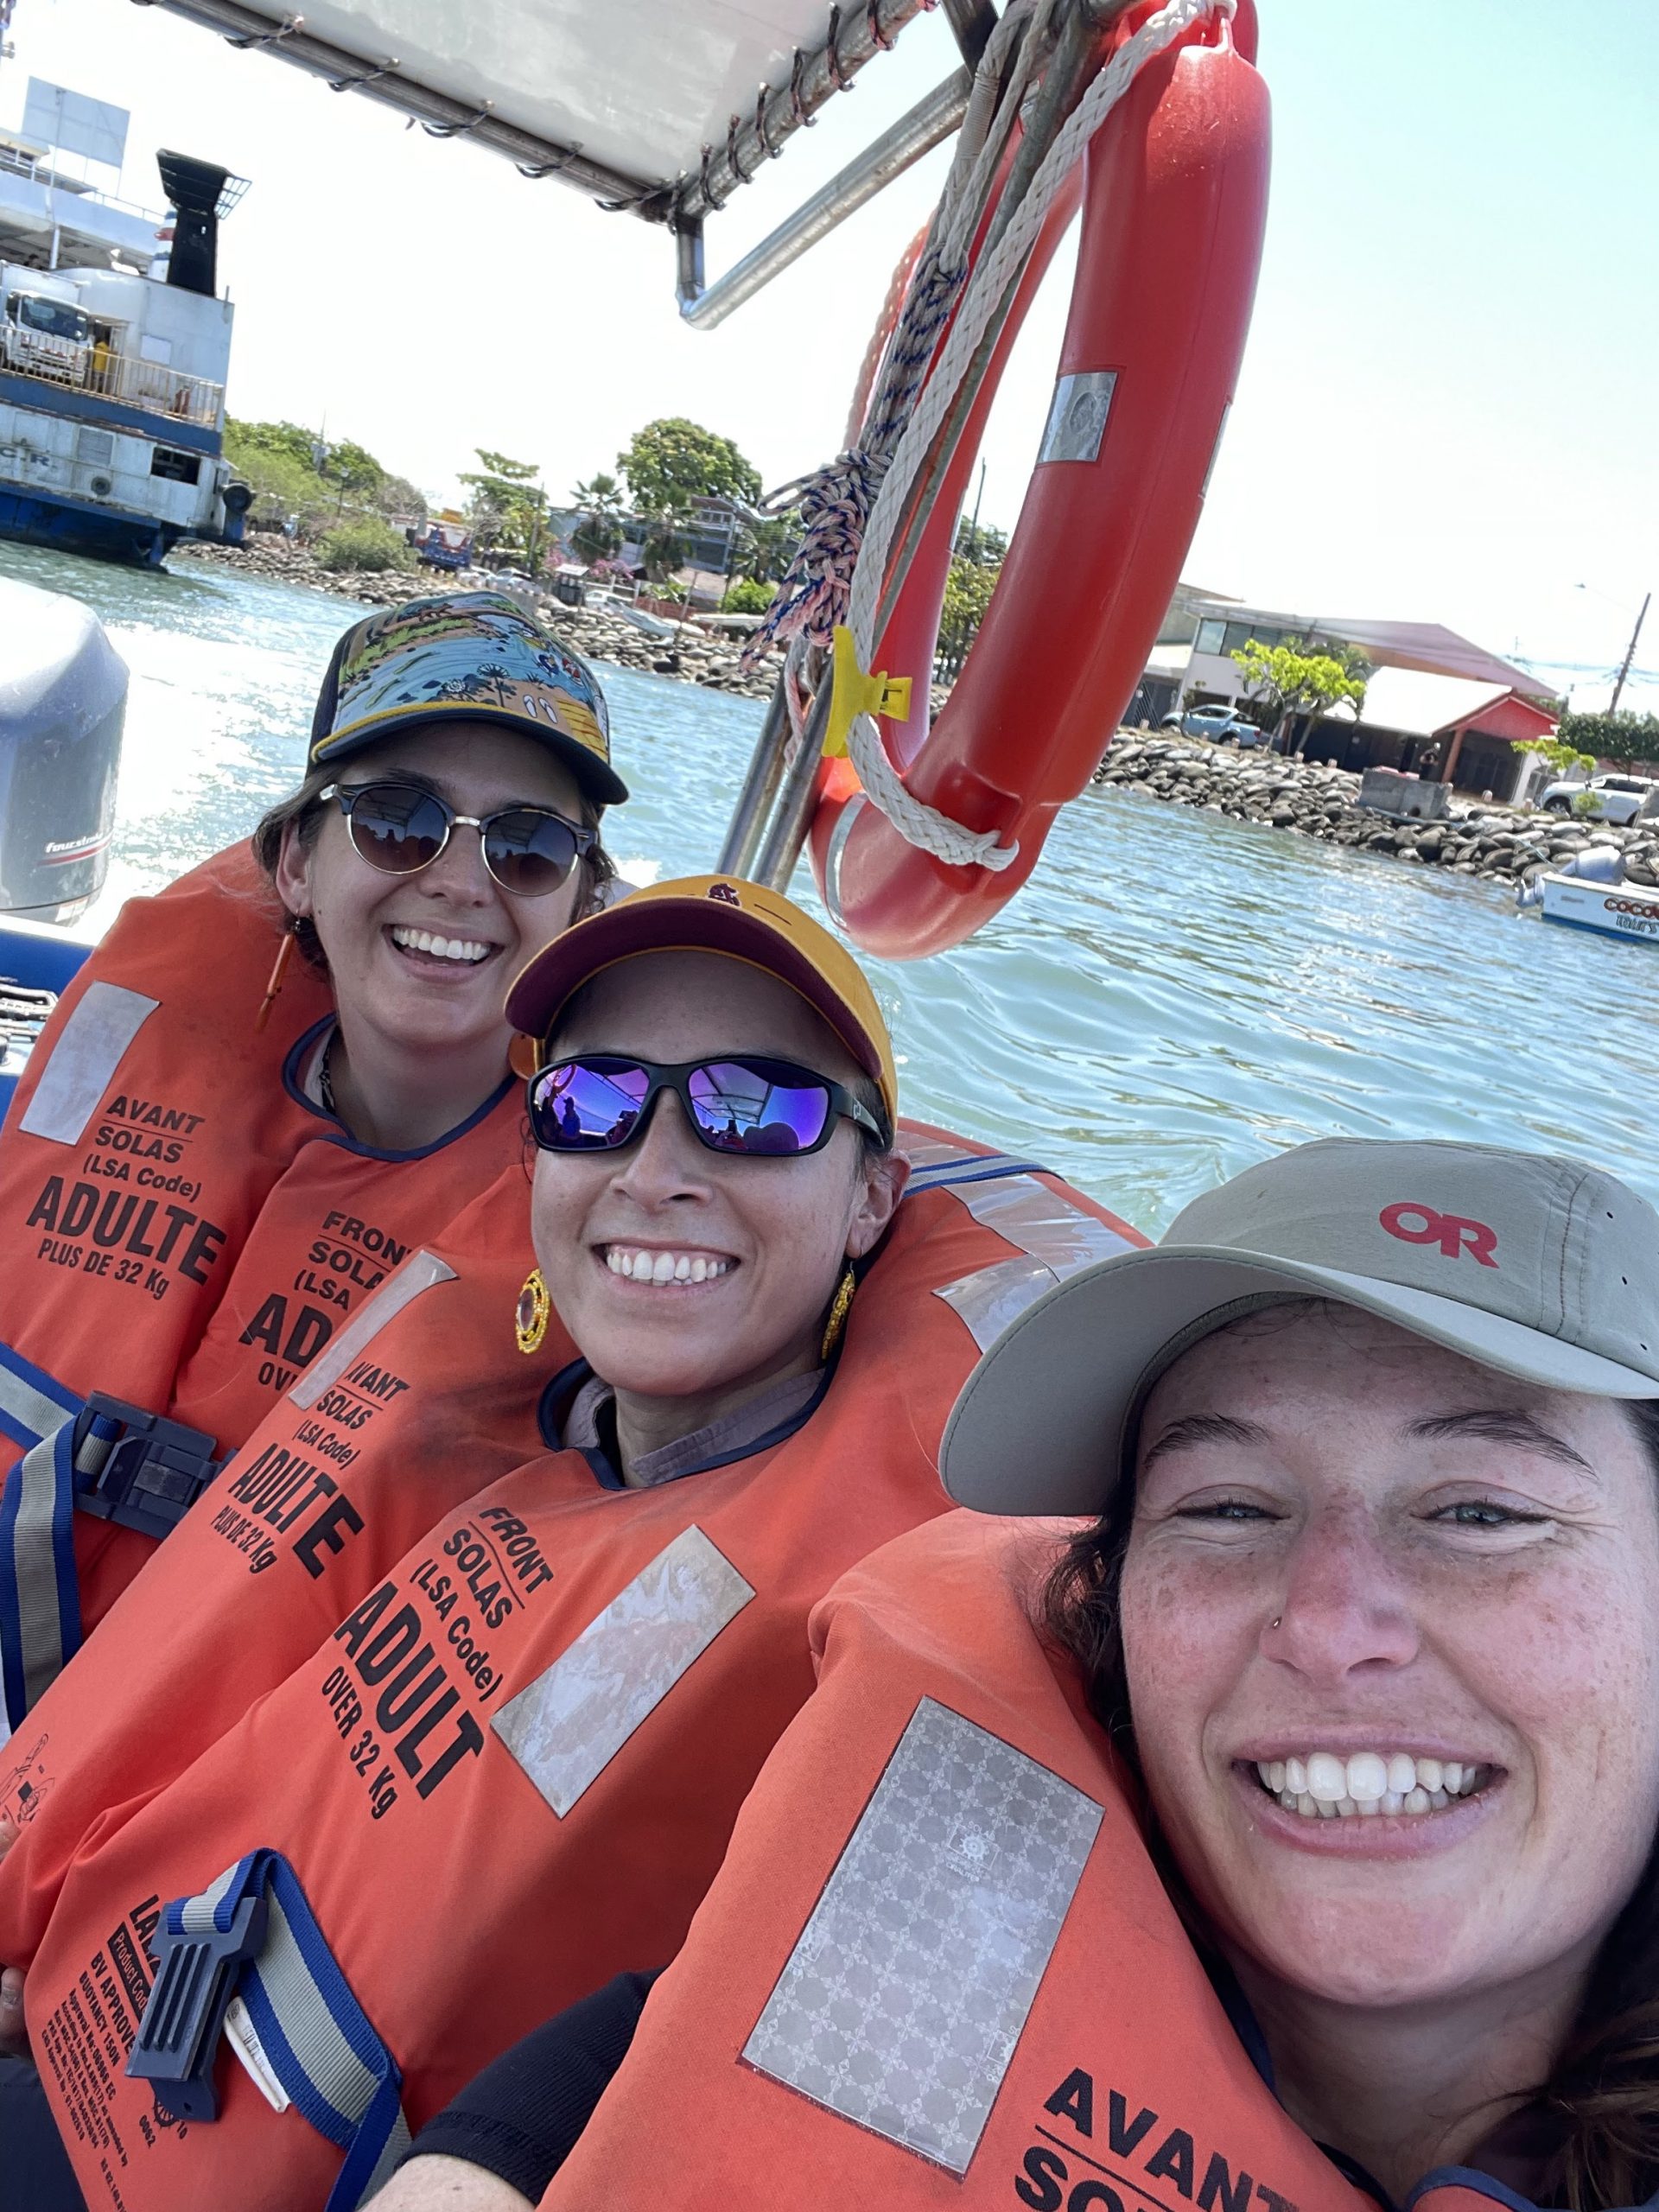 Three people on a boat wearing life vests